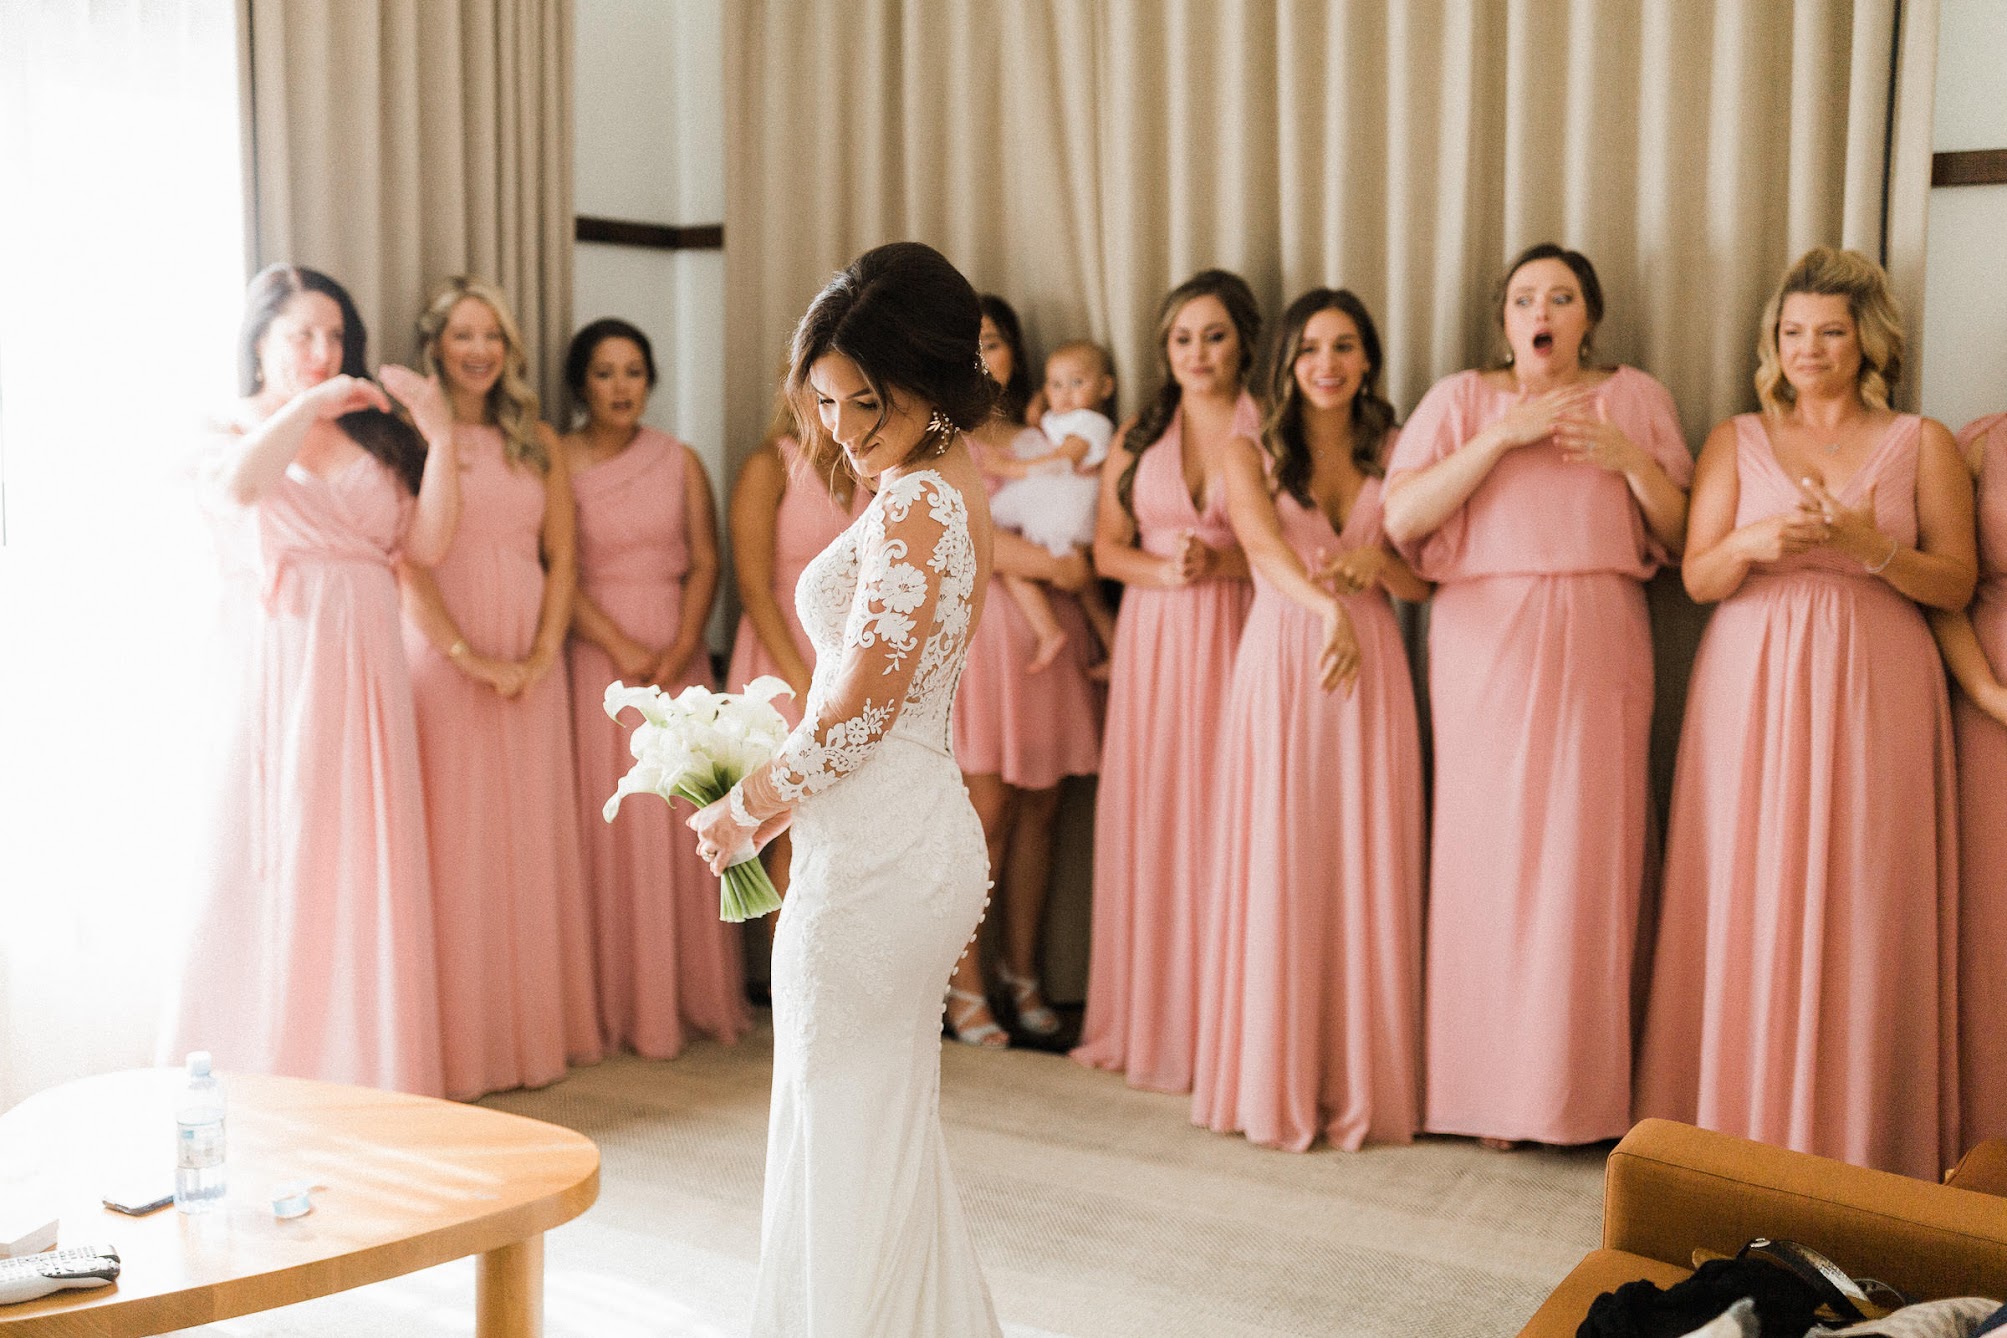 bride showing off her complete look to her bridesmaids. They are all smiling at her.